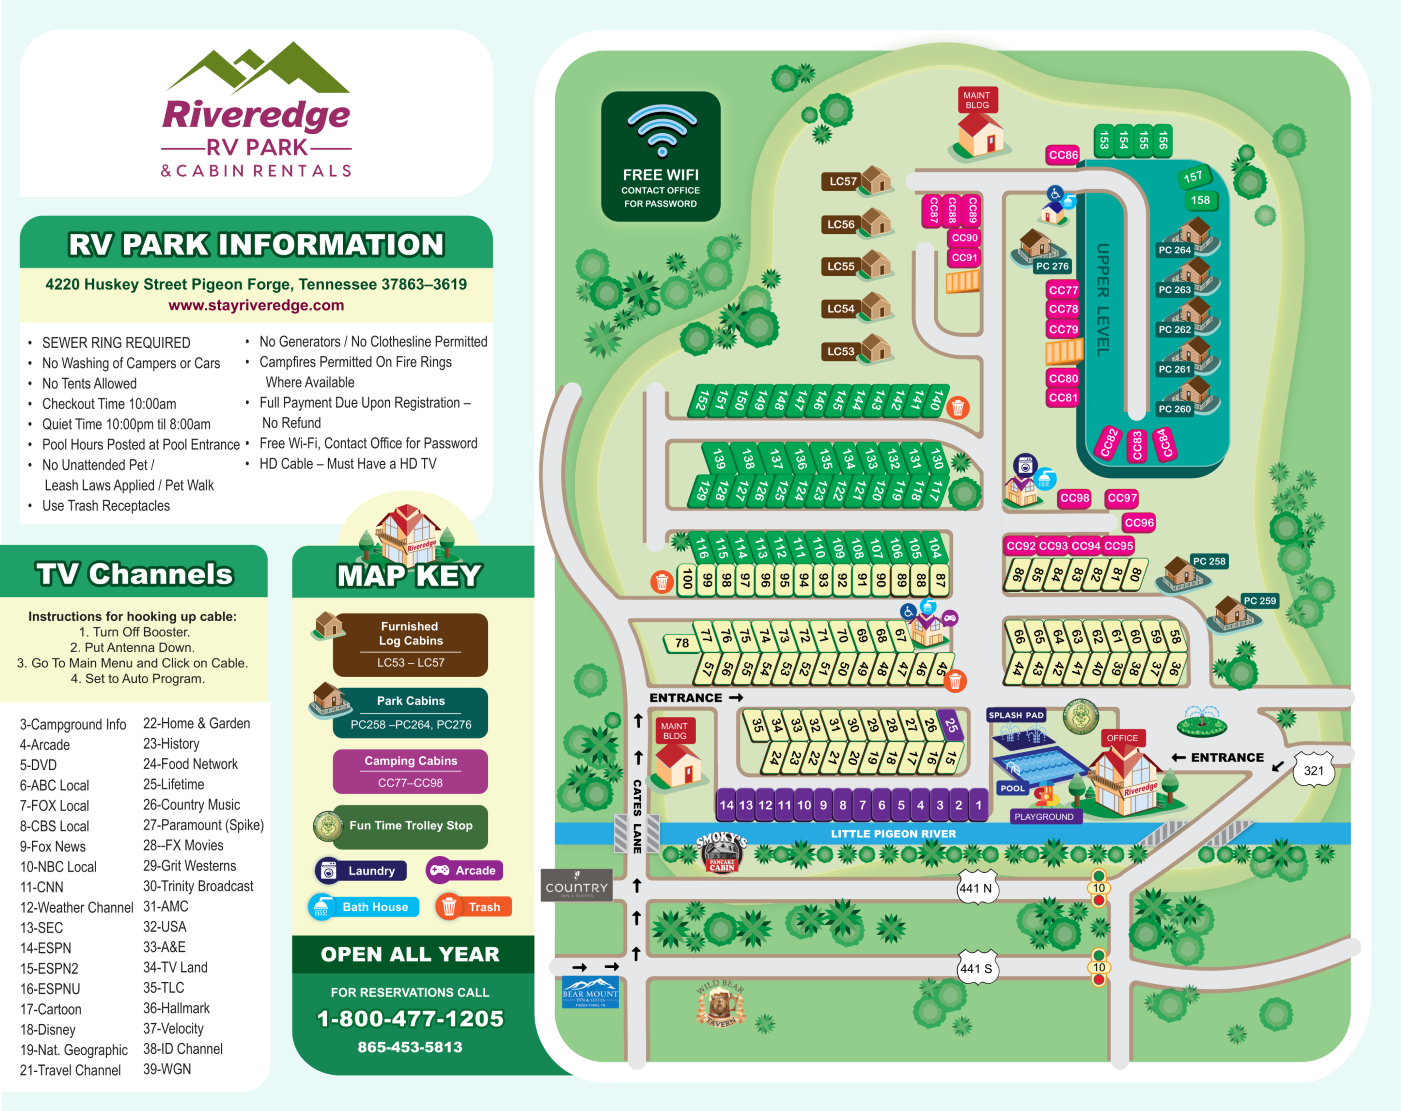 Pigeon Forge, TN RV Park campground map